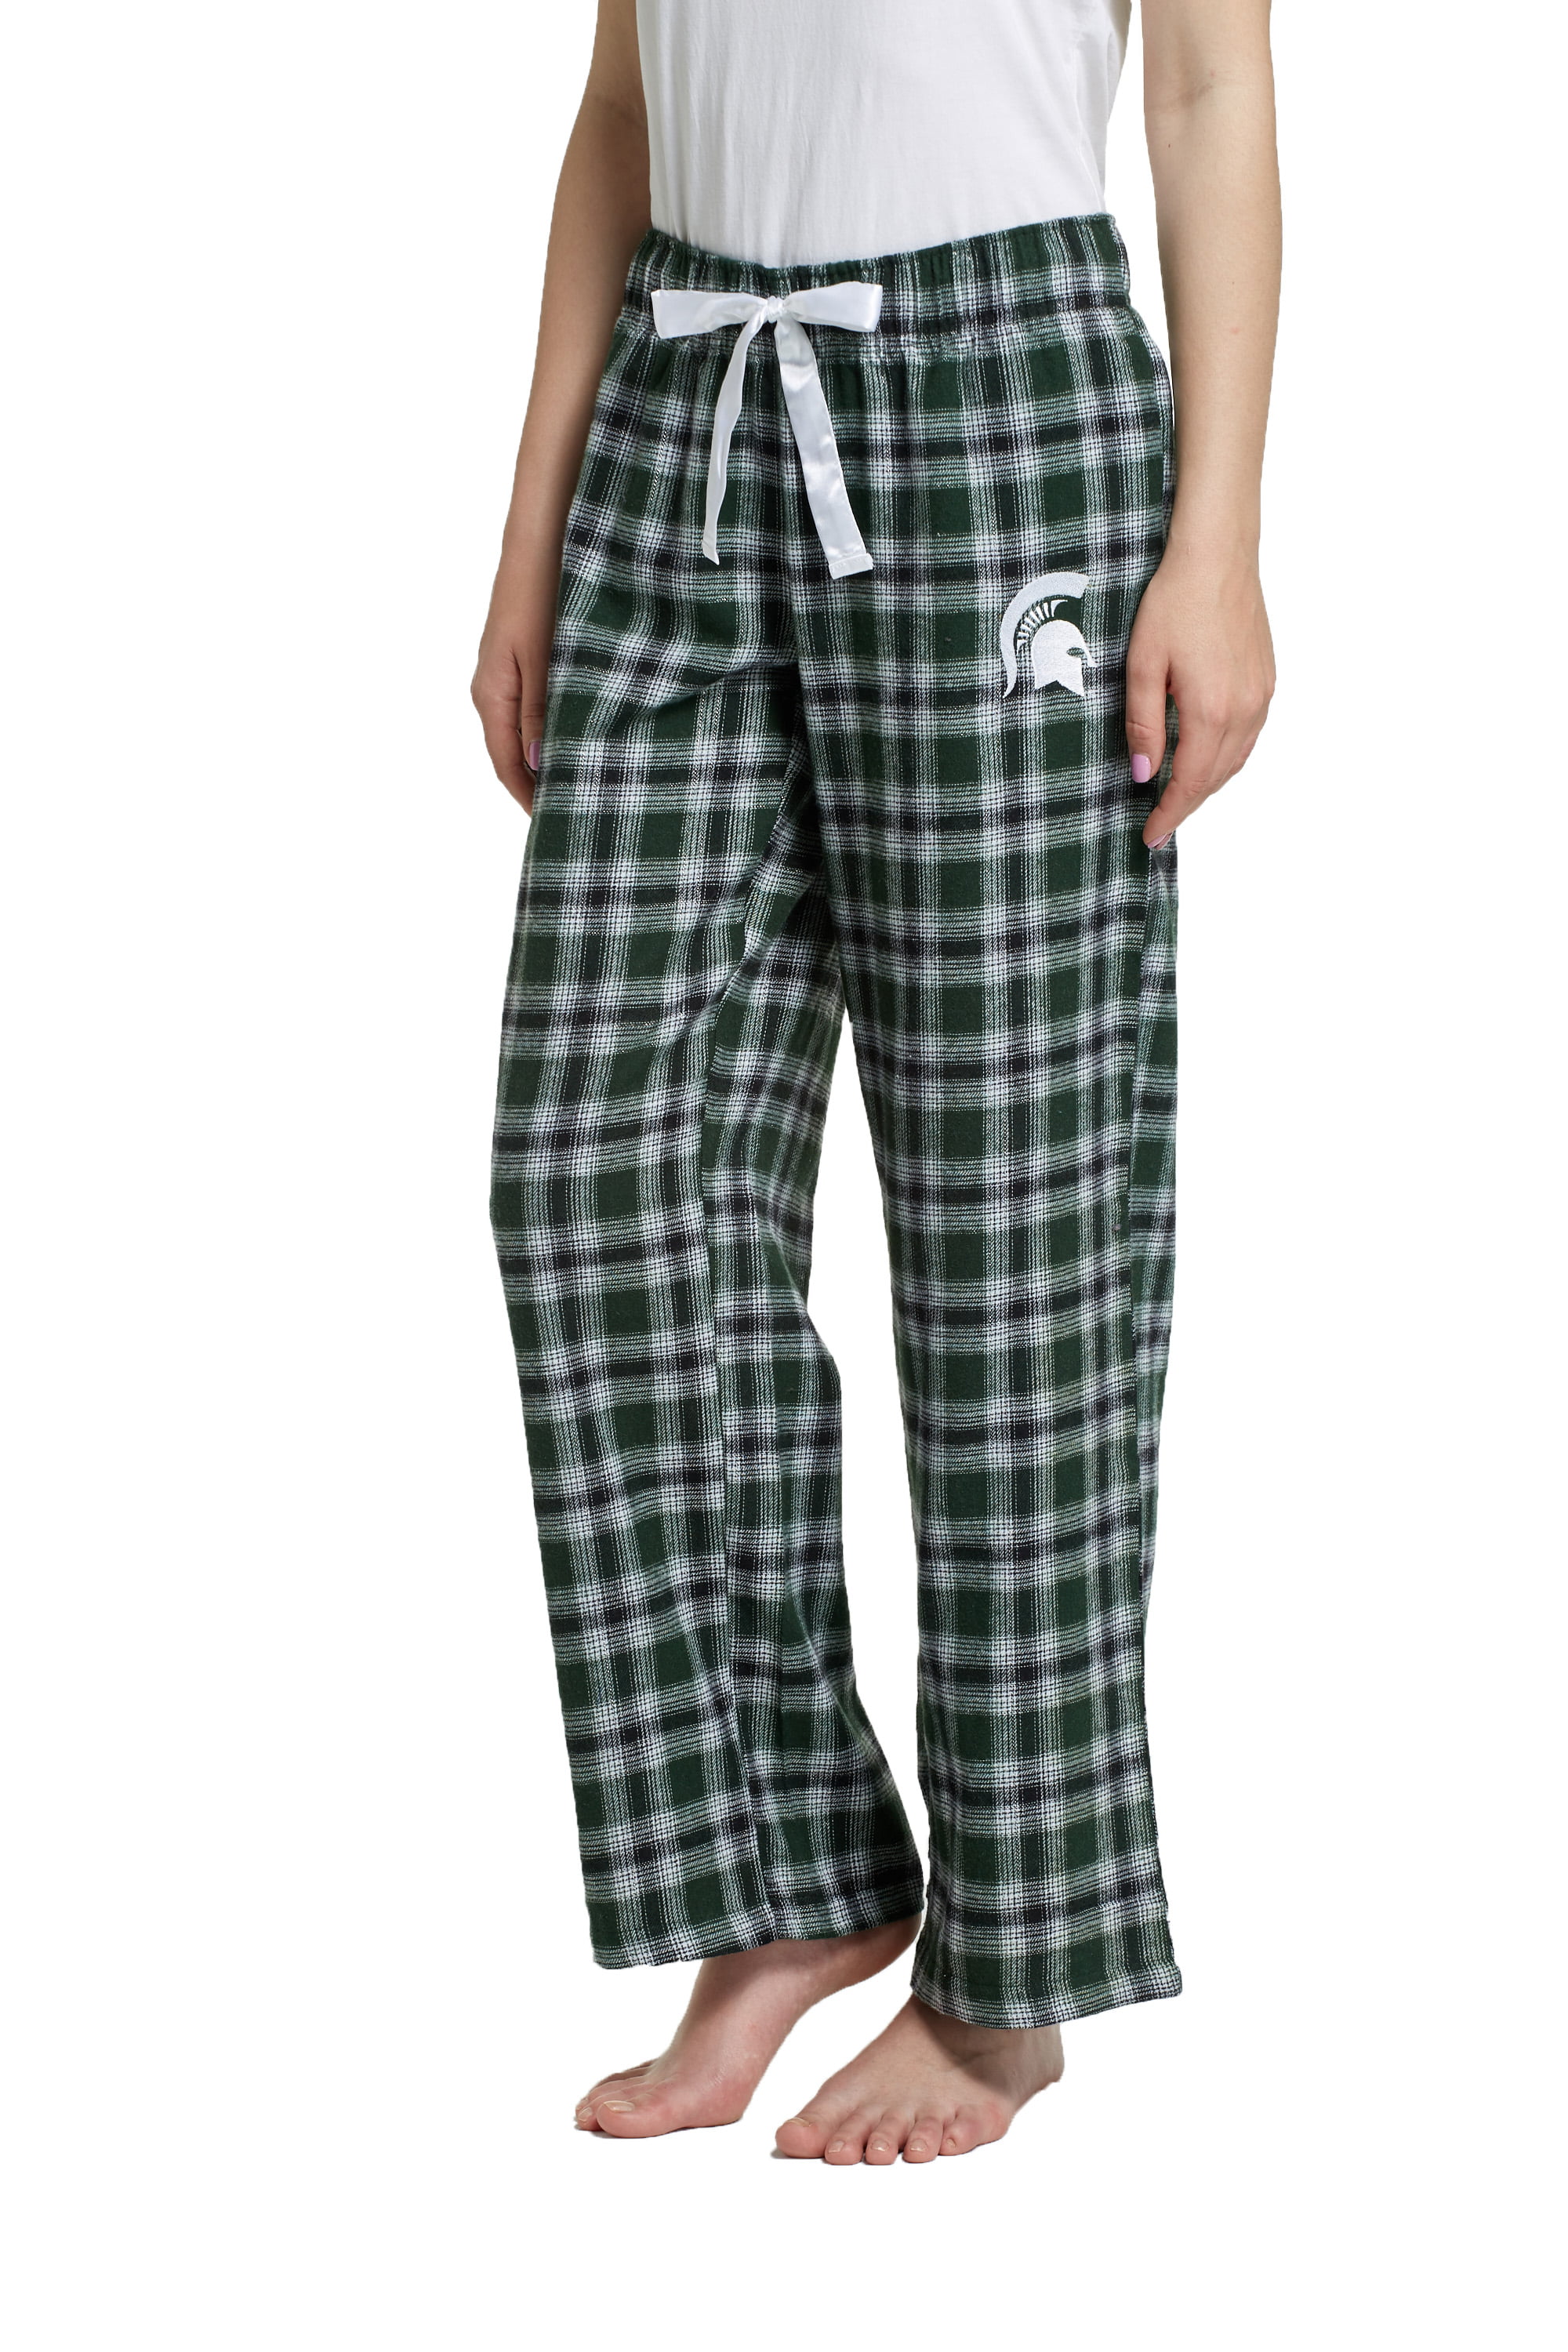 Sideline Apparel - Michigan State Spartans Ladies Flannel Pant ...